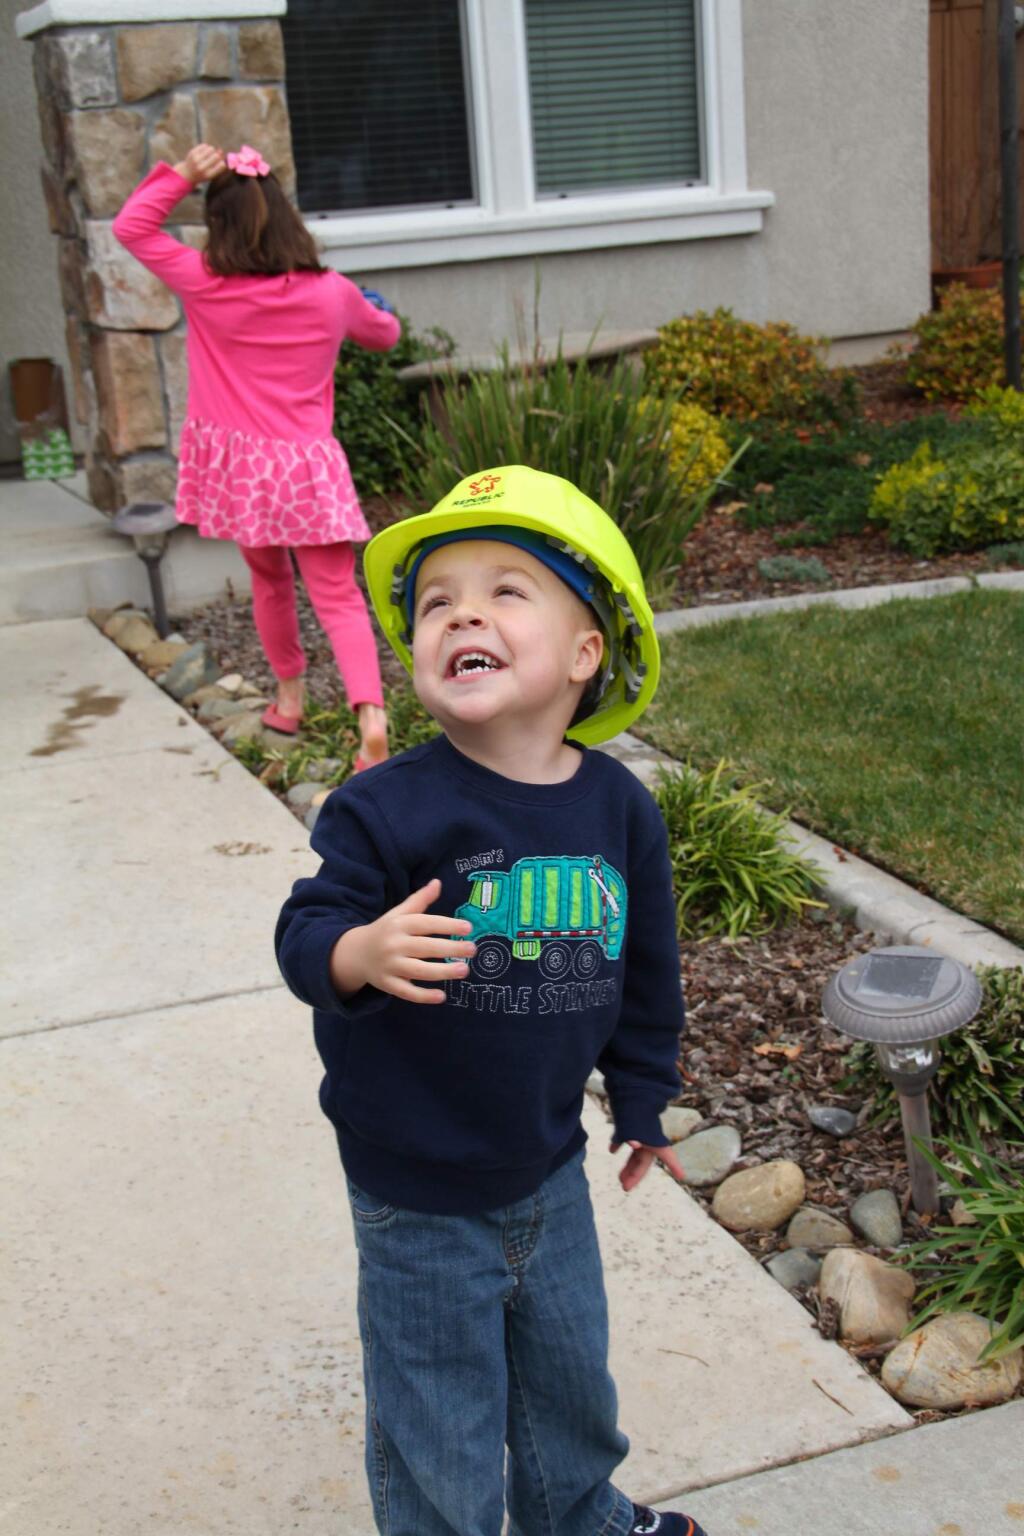 This February 2014 photo taken by Arnell Elegue and provided by the Make A Wish Foundation shows Ethan Dean in Rancho Cordova, Calif. Dean, 6, who has cystic fibrosis, will have his dream to be a garbage man come true with help of the Make-A-Wish Foundation. Dean will ride along on a garbage truck collecting trash at various locations in Sacramento, Calif., Tuesday, July 26, 2016. (Arnell Elegue/Make A Wish Foundation via AP)